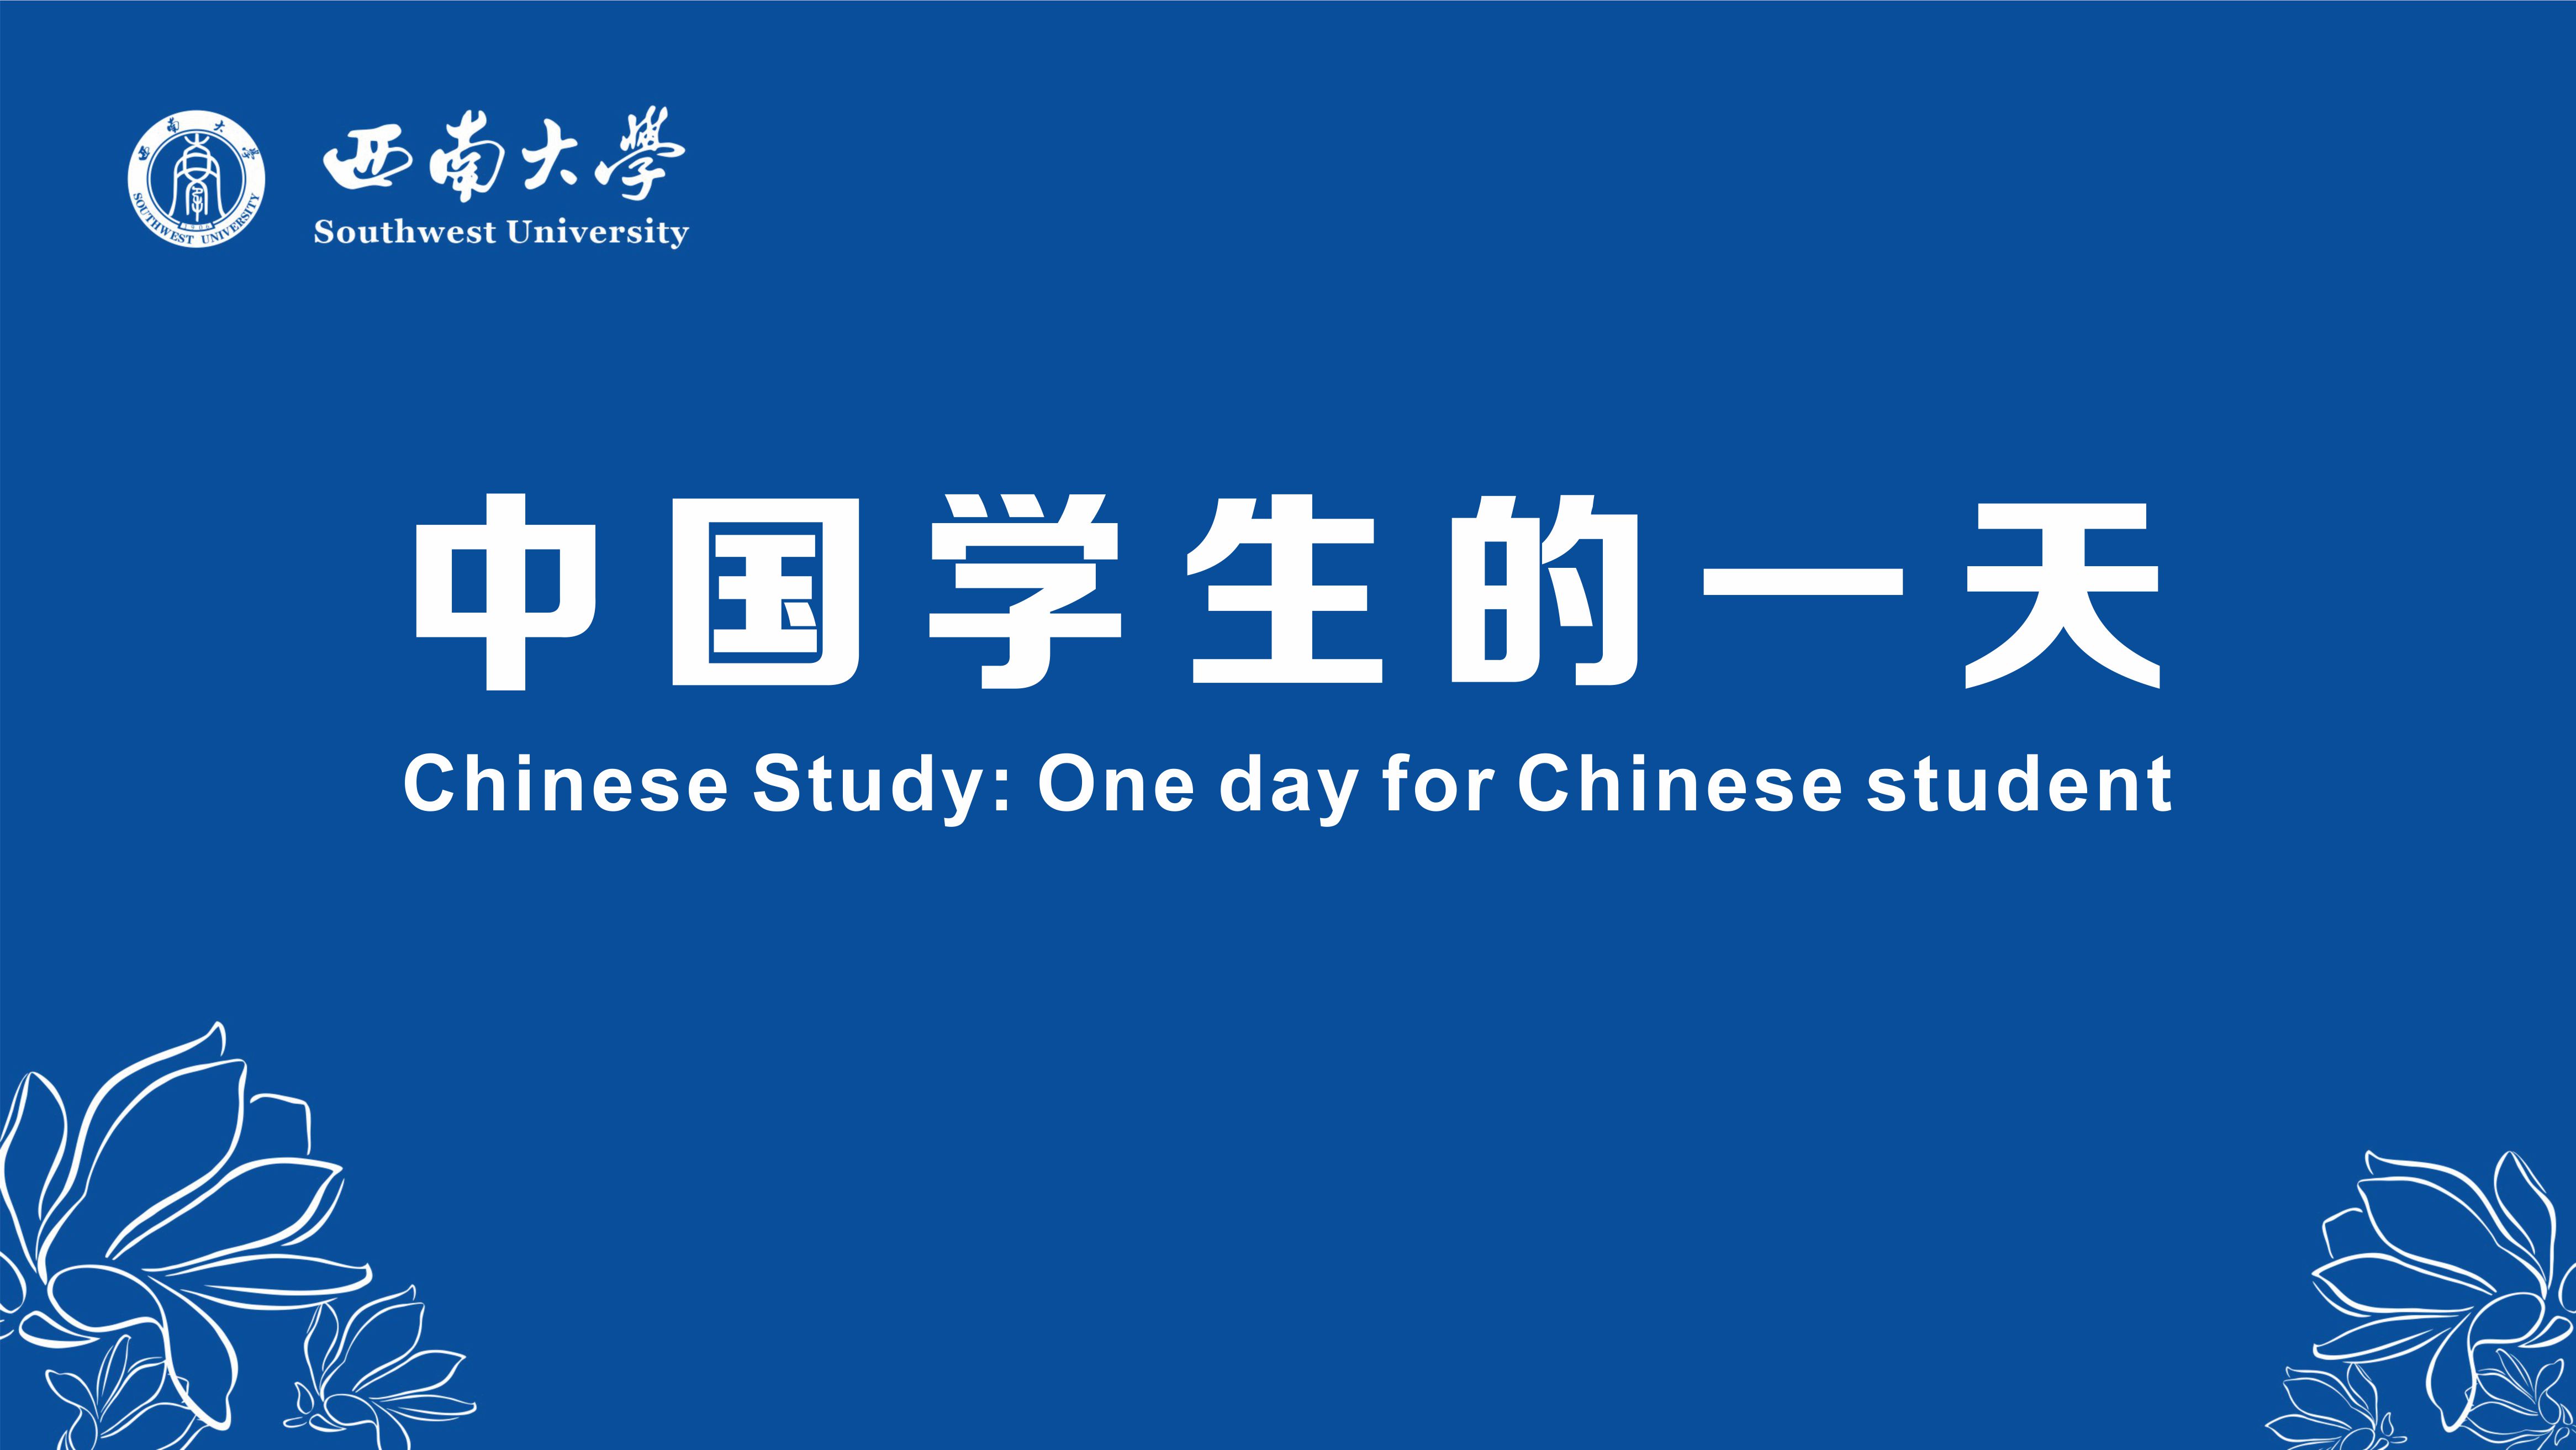 One day for  Chinese student